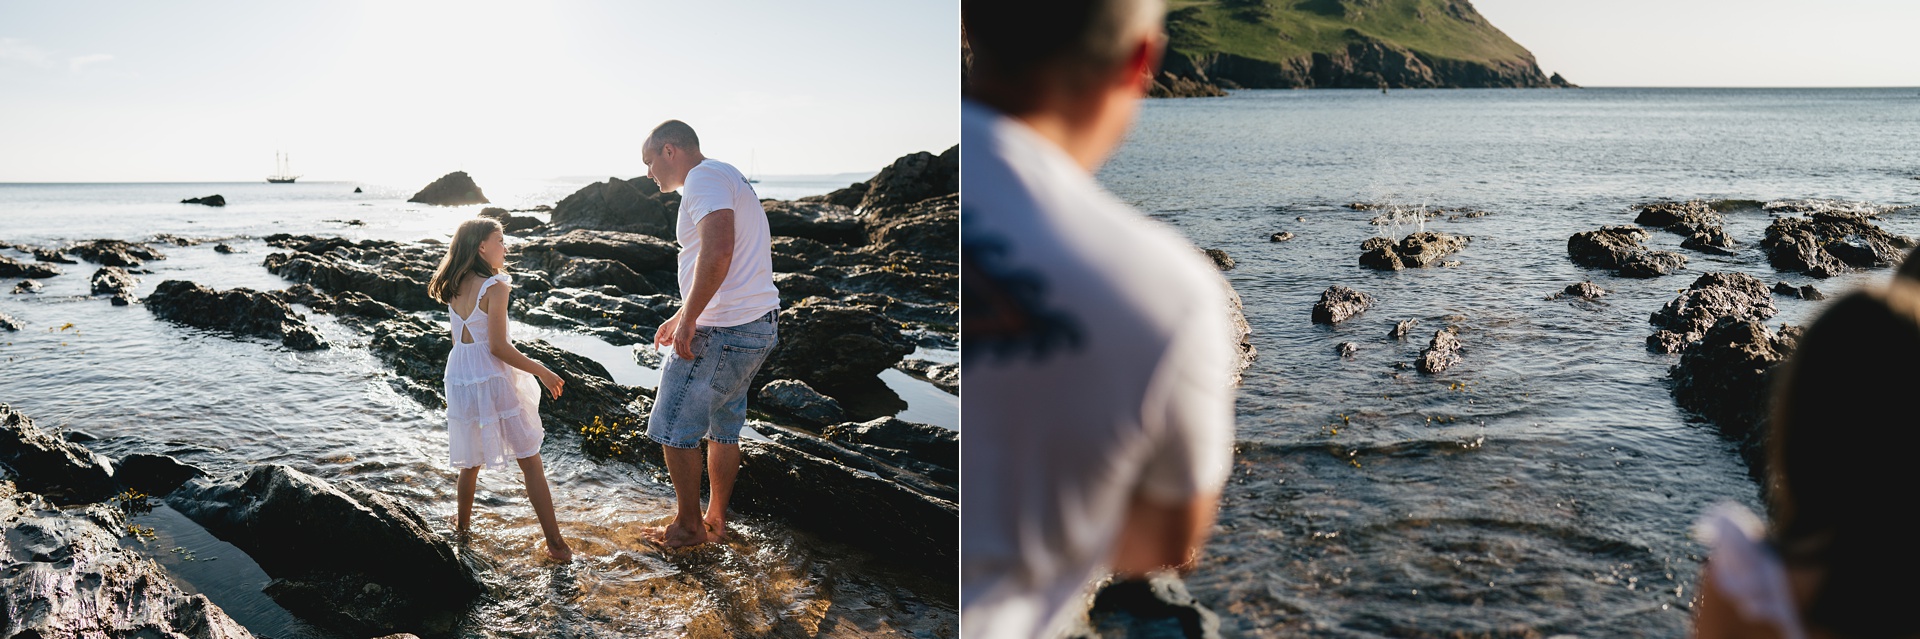 A father and daughter skimming stones into the sea during a photo session at the beach